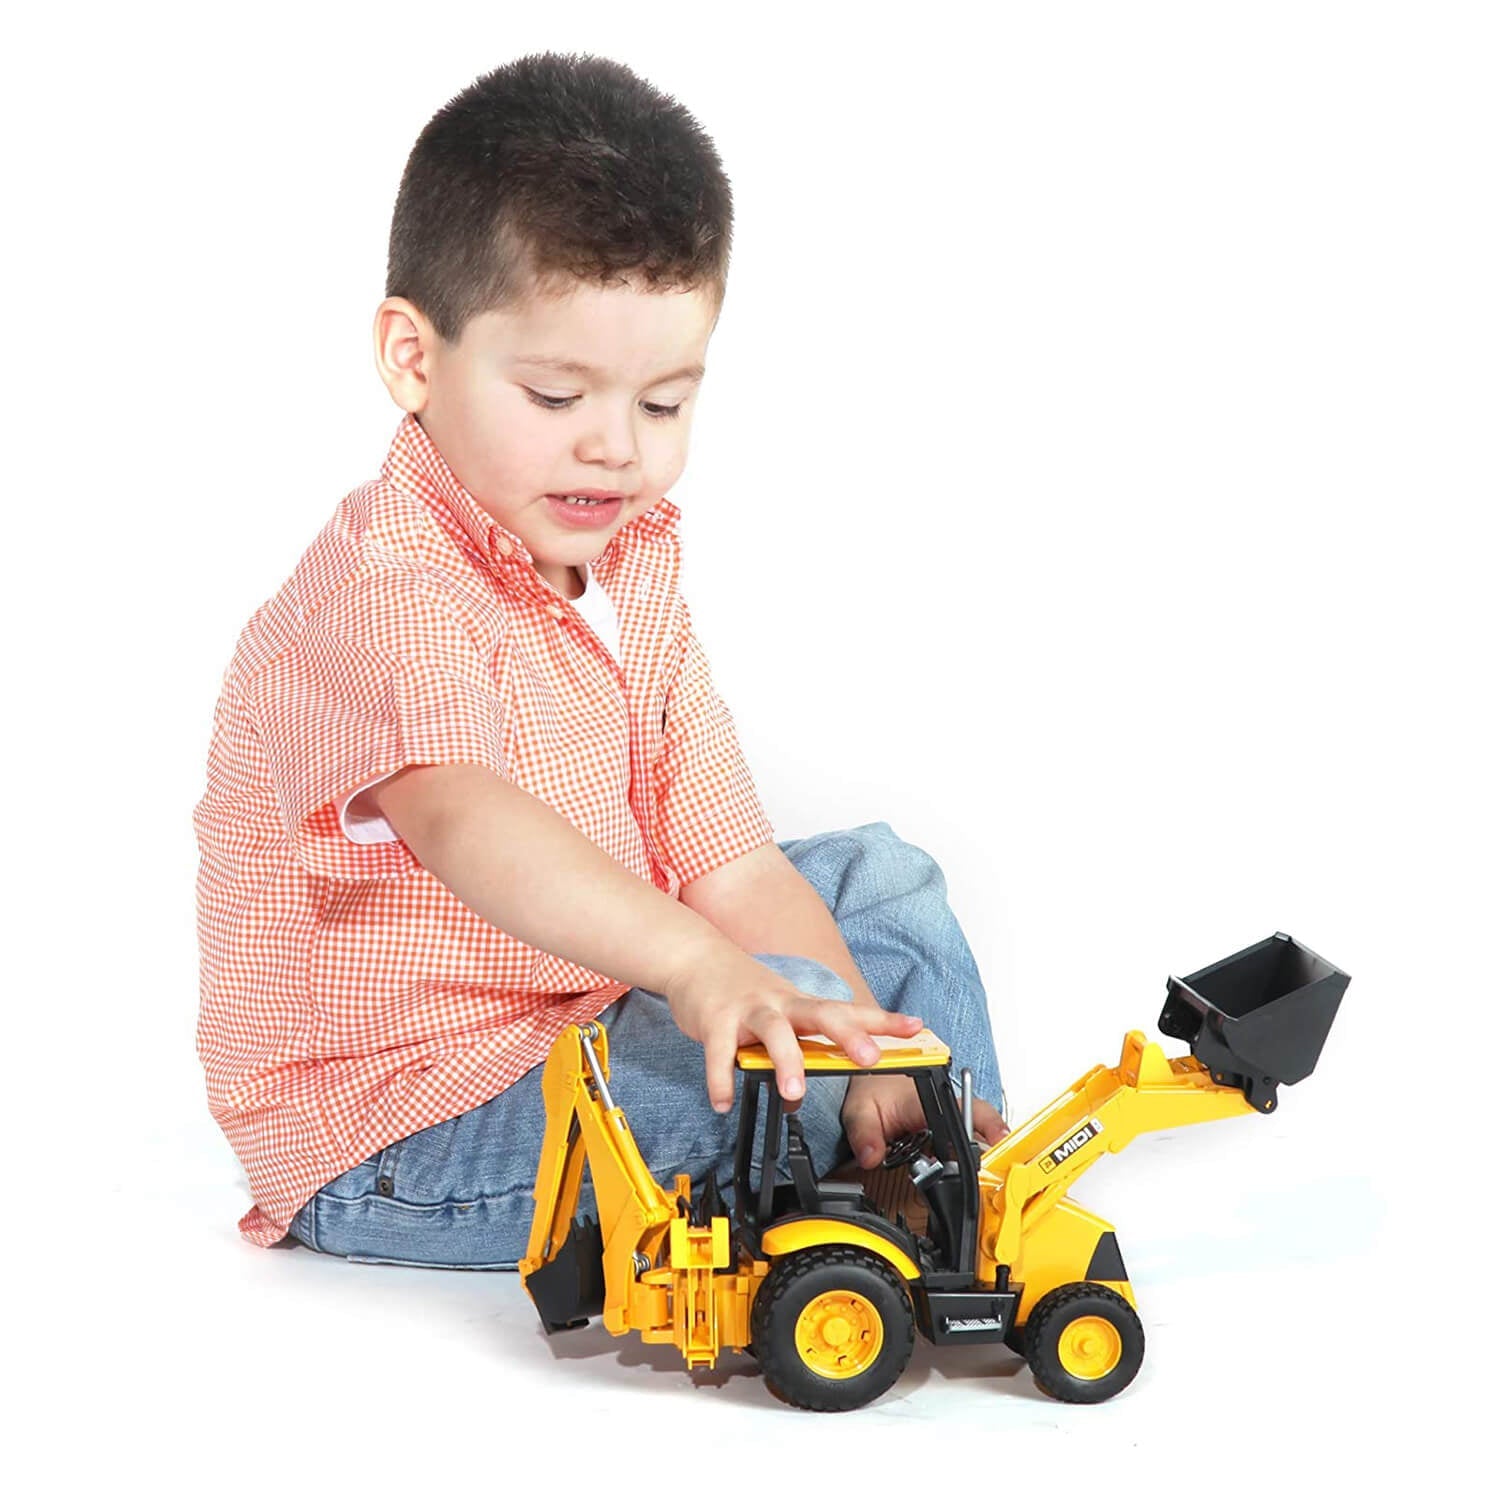 Kid playing with the JCB midi CX vehicle.